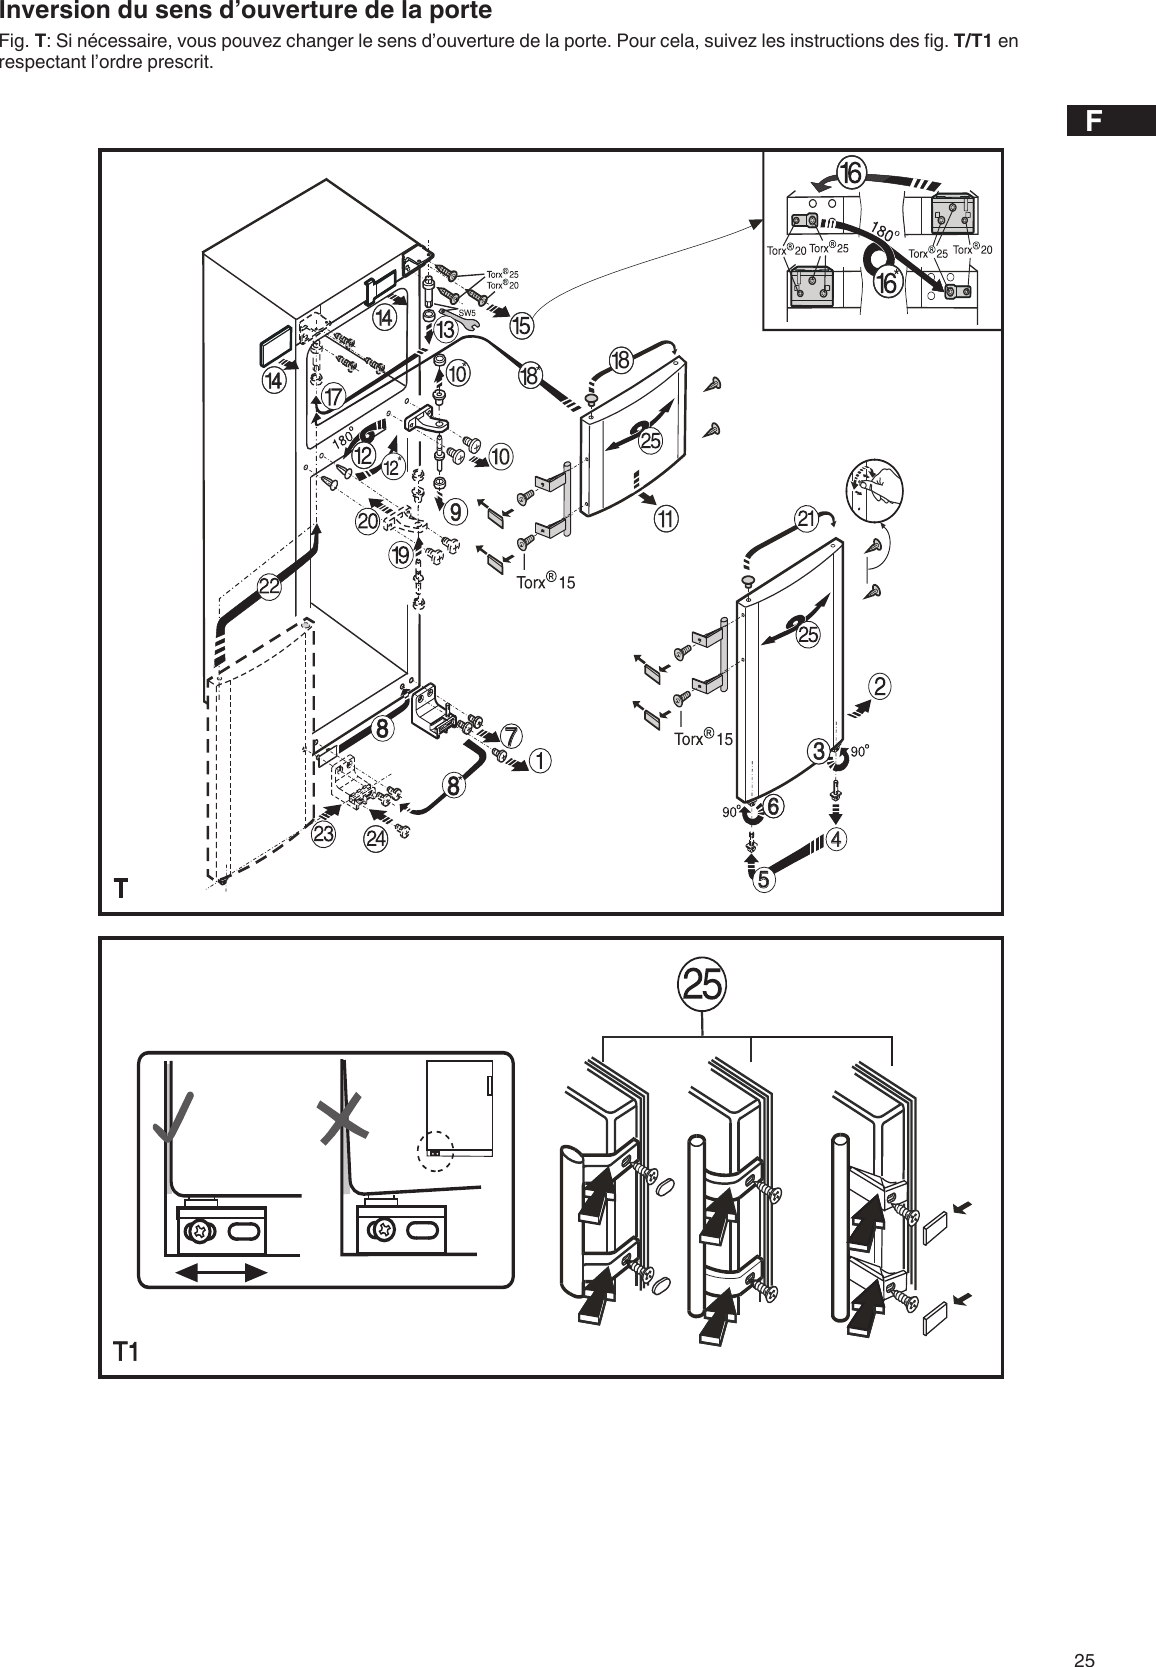 Page 7 of 7 - Liebherr Liebherr-Combined-Refrigerator-Freezer-Nofrost-7081-885-01-Users-Manual-  Liebherr-combined-refrigerator-freezer-nofrost-7081-885-01-users-manual